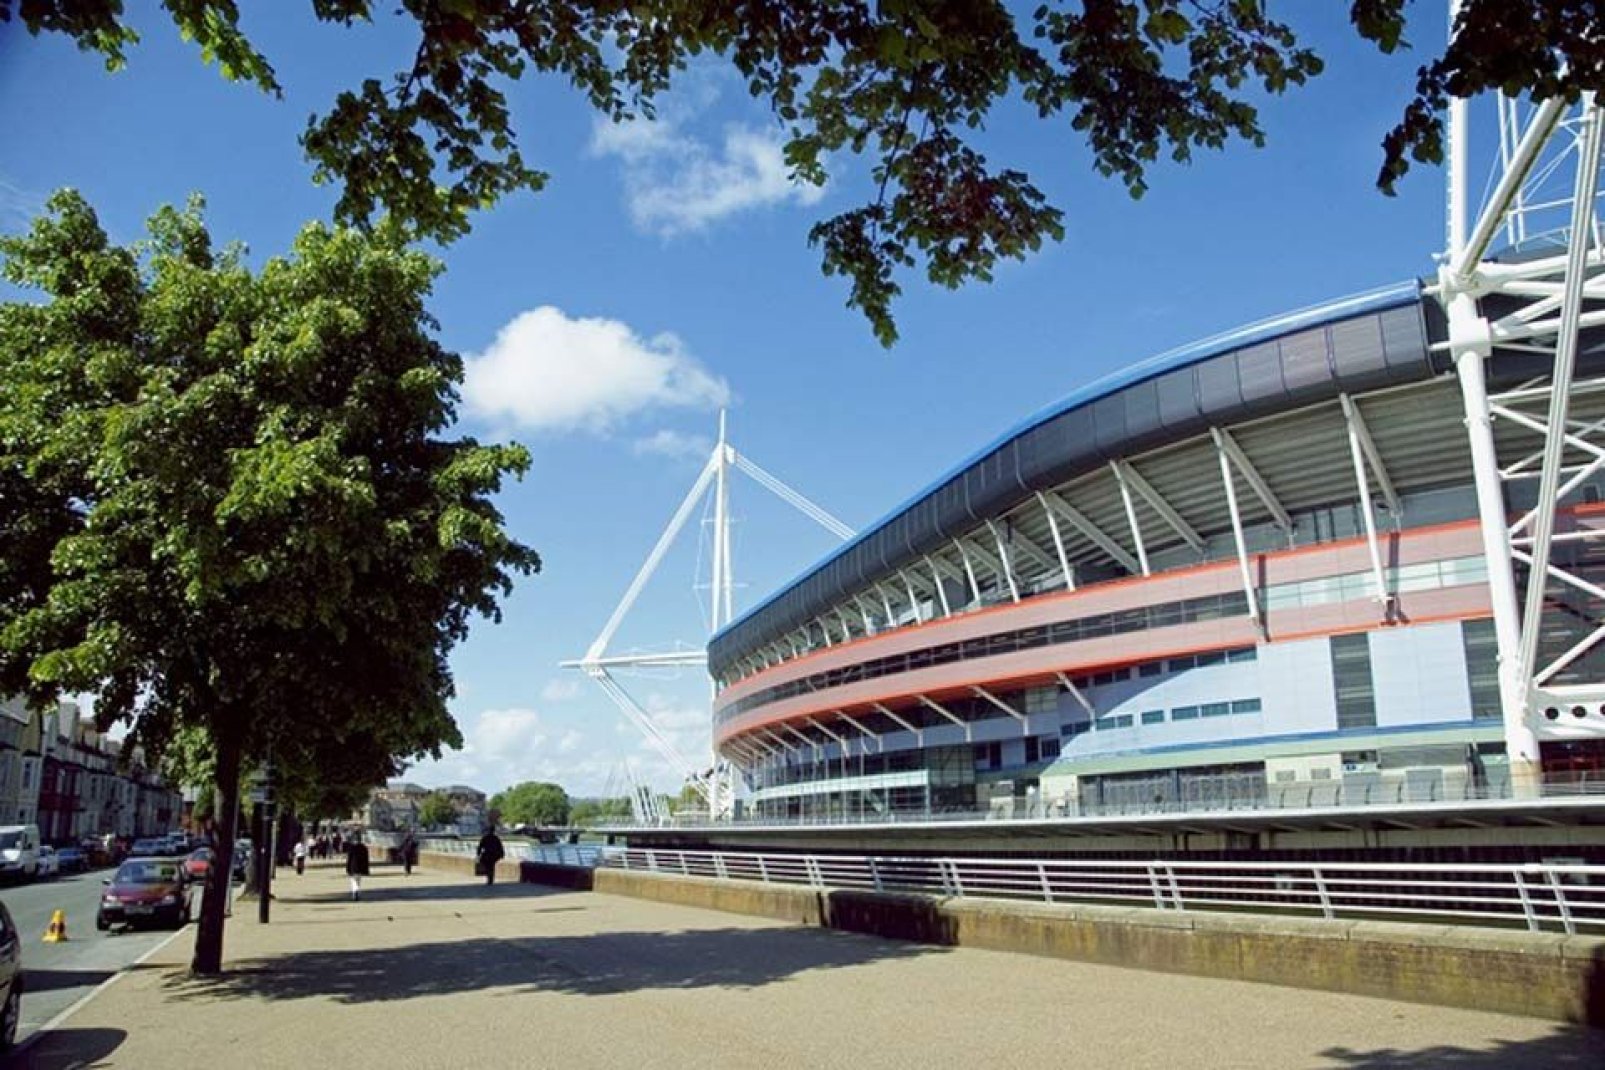 One of the biggest arenas in the UK, it holds 74,500 spectators and hosts football, rugby, motorsports, concerts and more